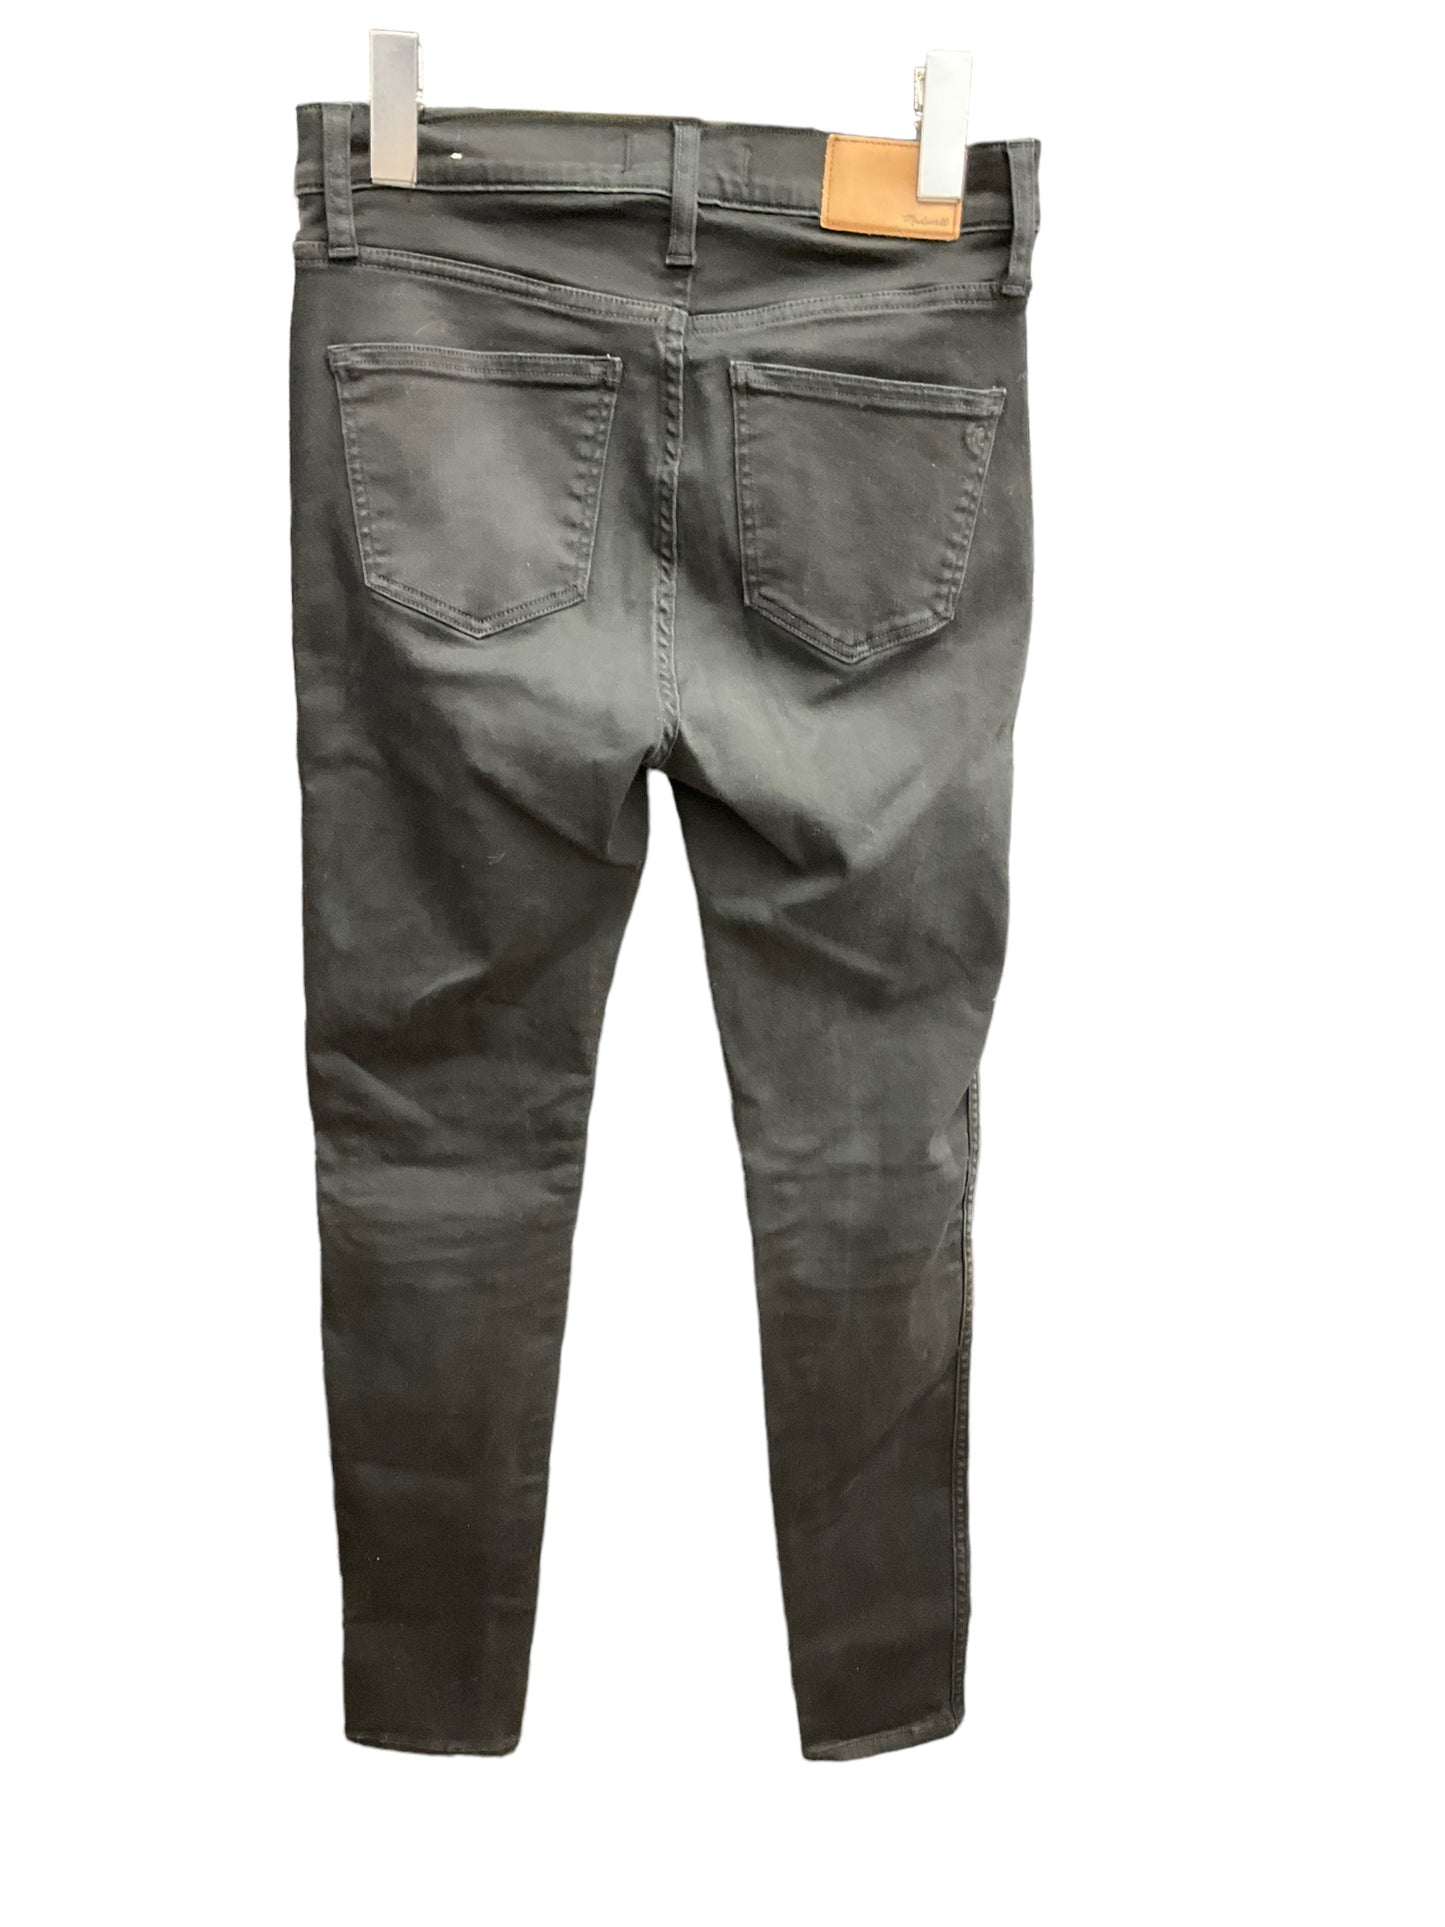 Pants Cargo & Utility By Madewell  Size: 2